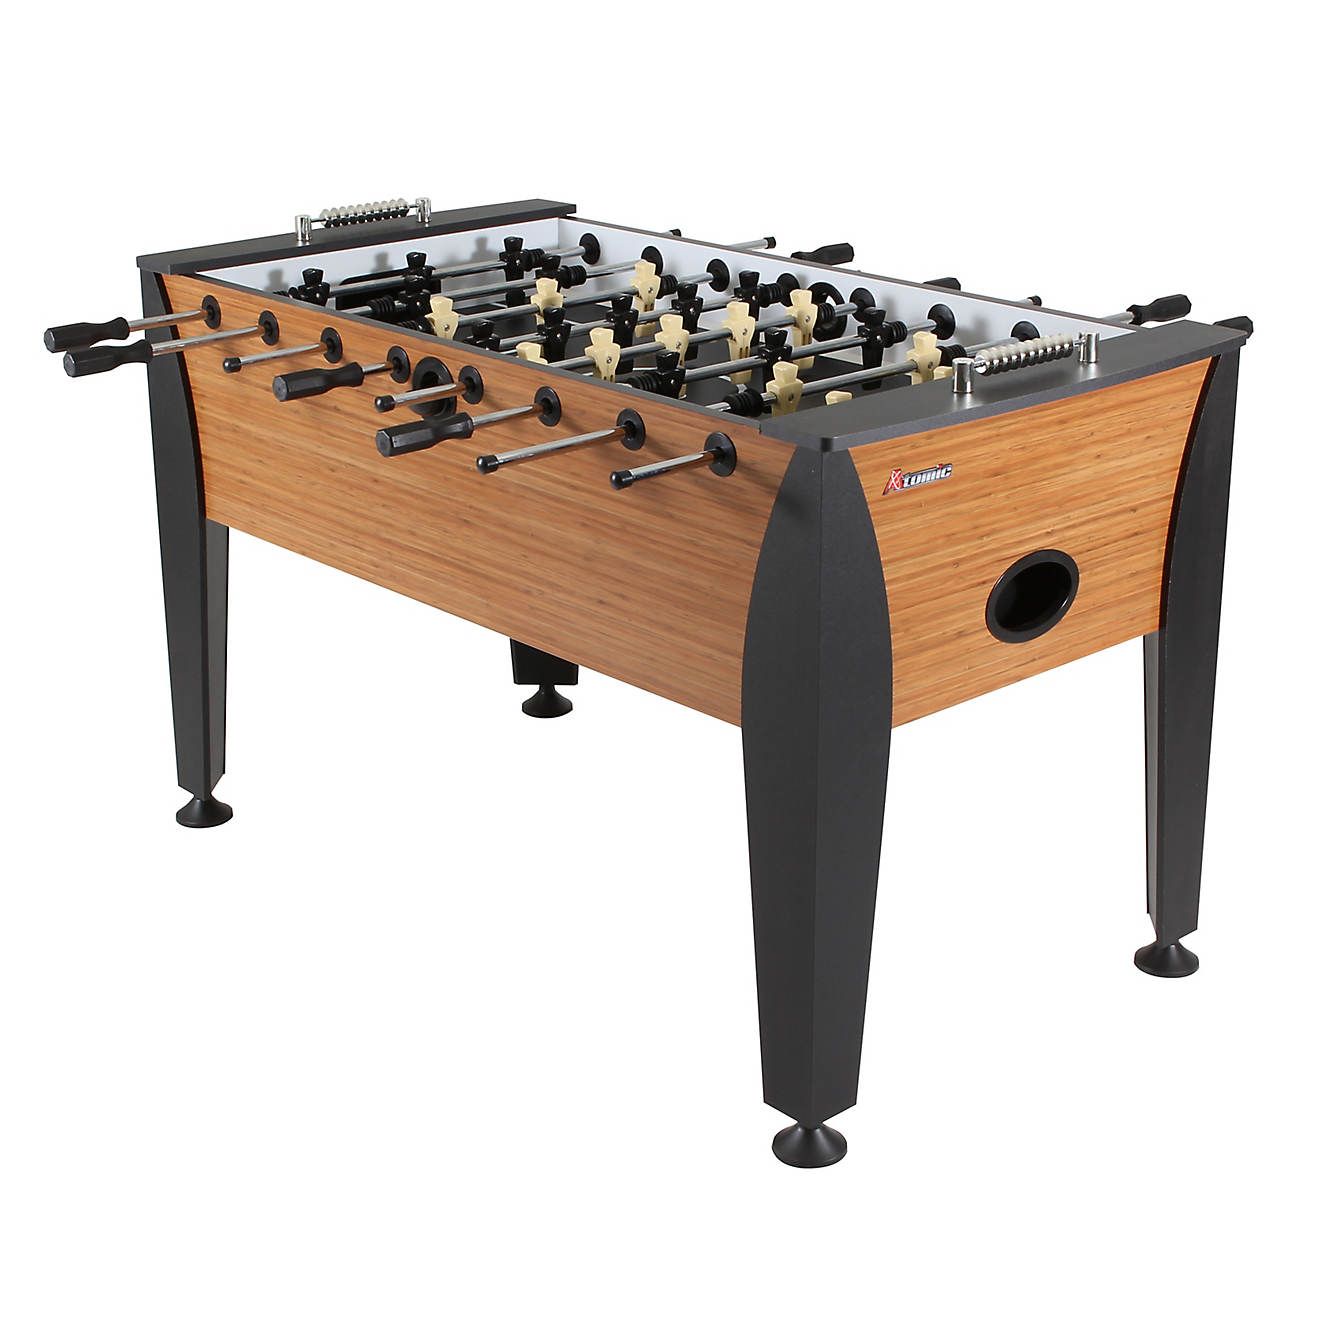 Atomic Pro Force Foosball Table | Academy Sports + Outdoor Affiliate